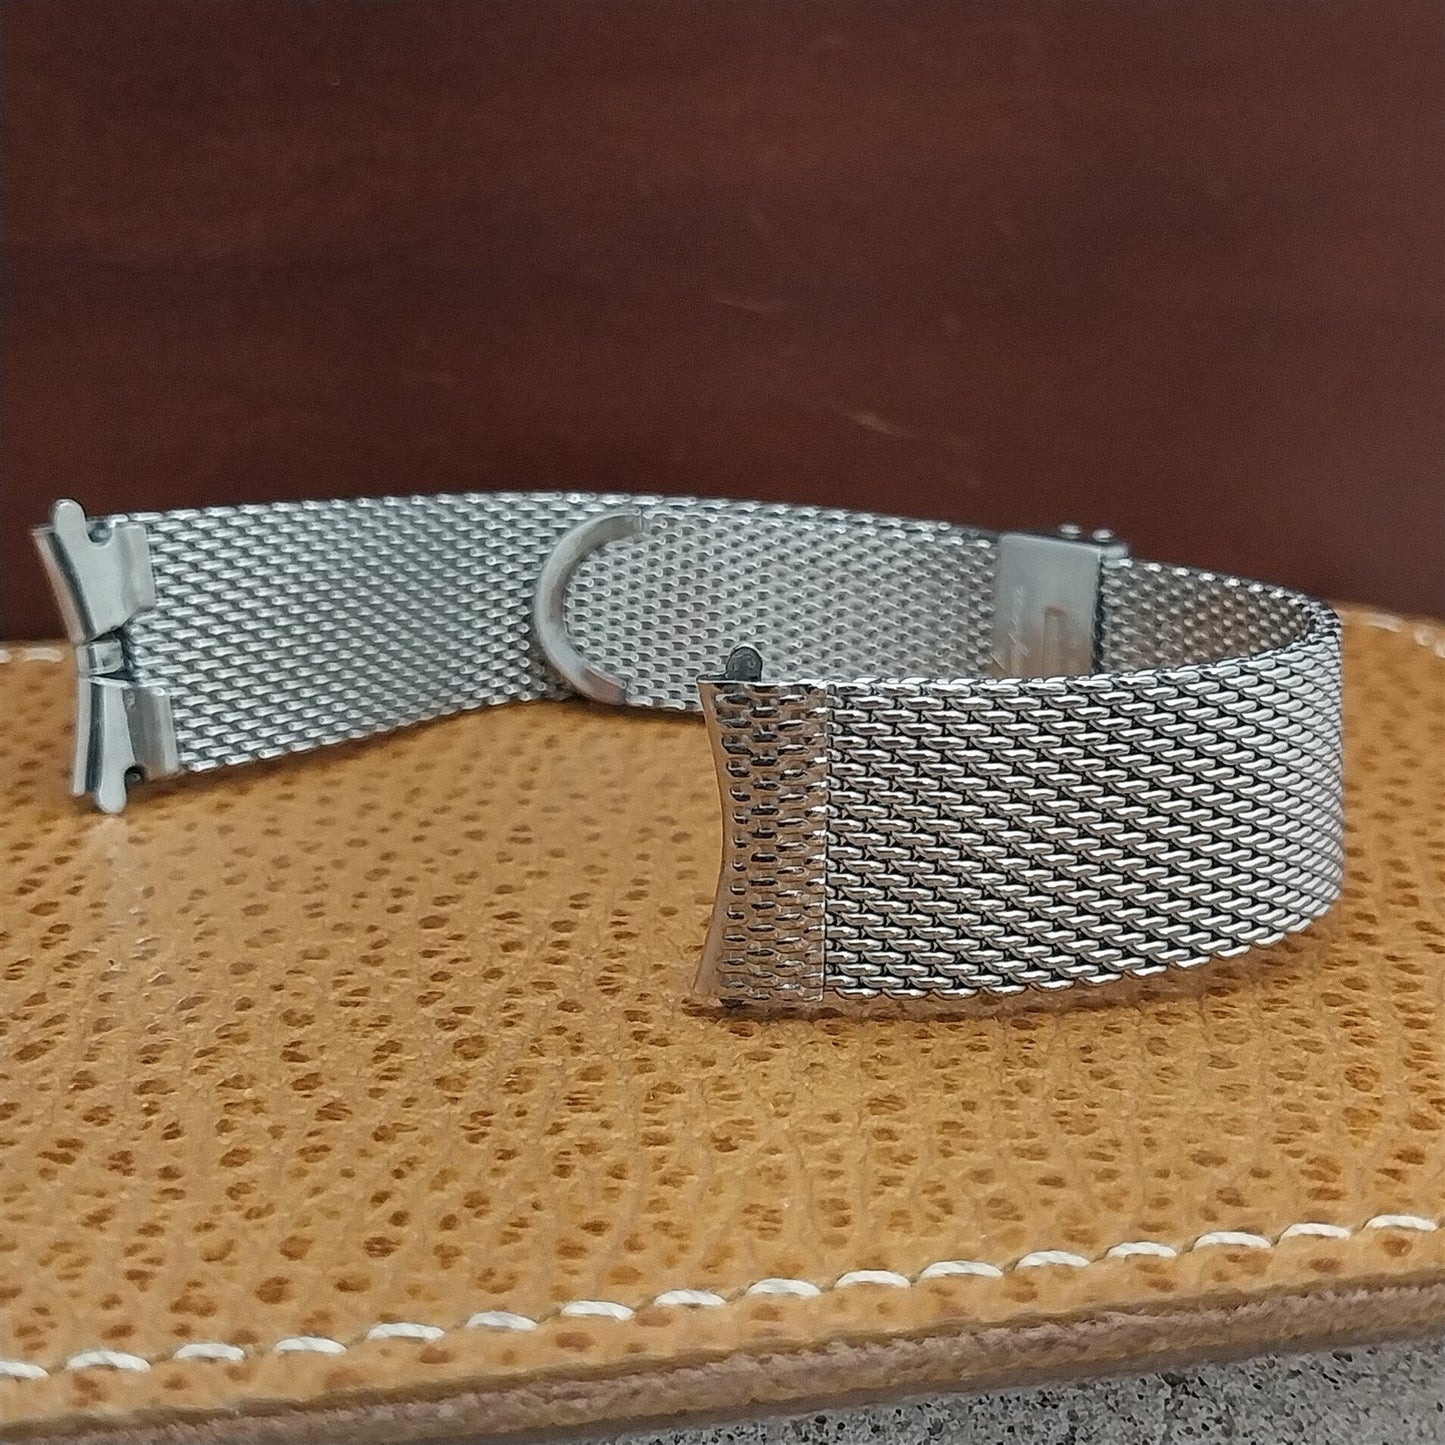 17.2mm Stainless Steel Mesh 1960s JB Champion USA Unused nos Vintage Watch Band